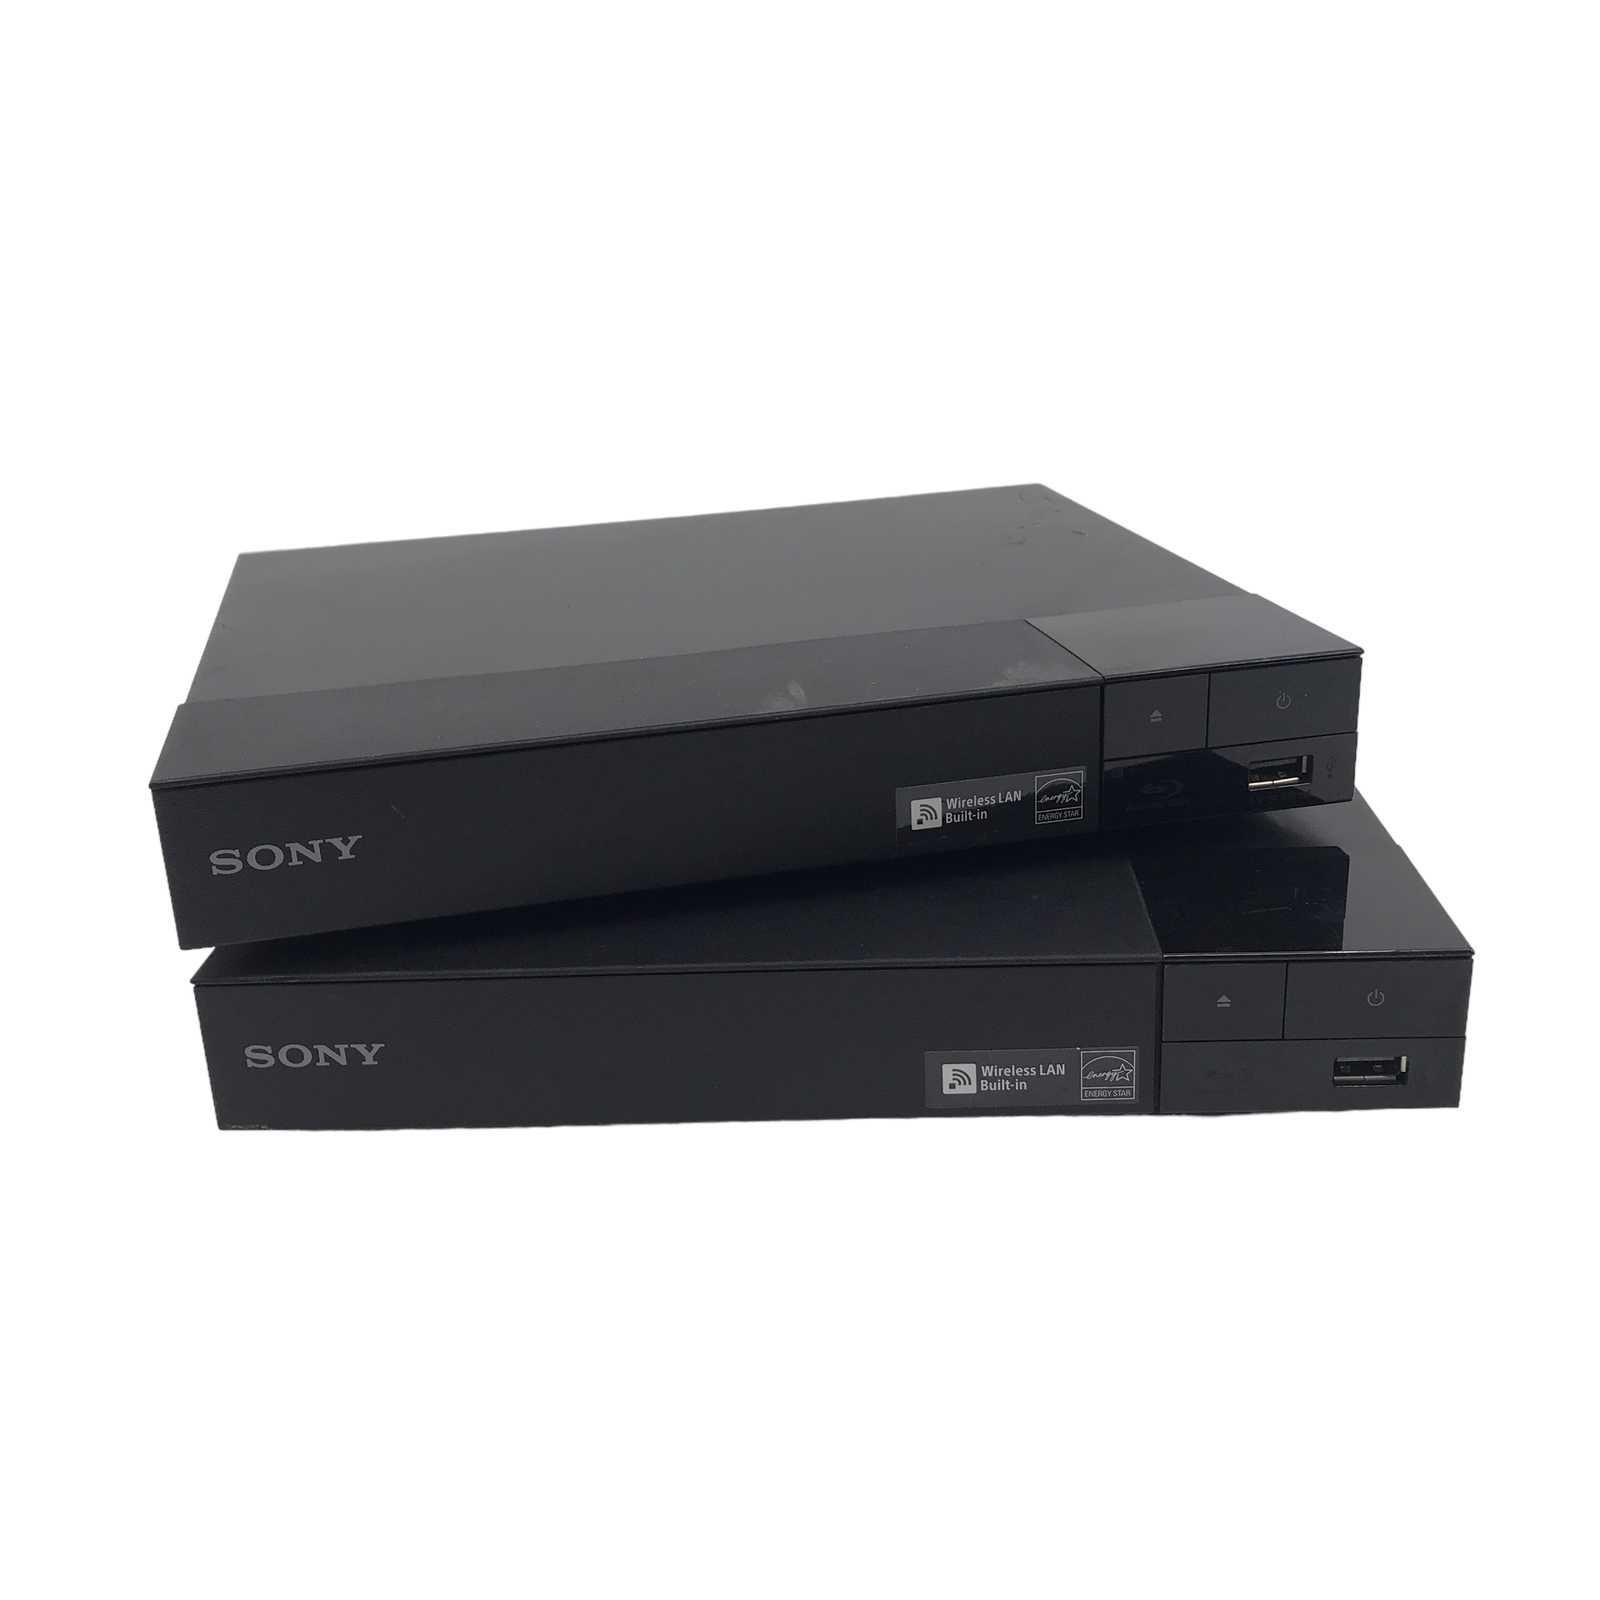 Lot of 2 Sony BDP-S3700 Streaming Blu-Ray Disc Player Black #M2316 - $32.56